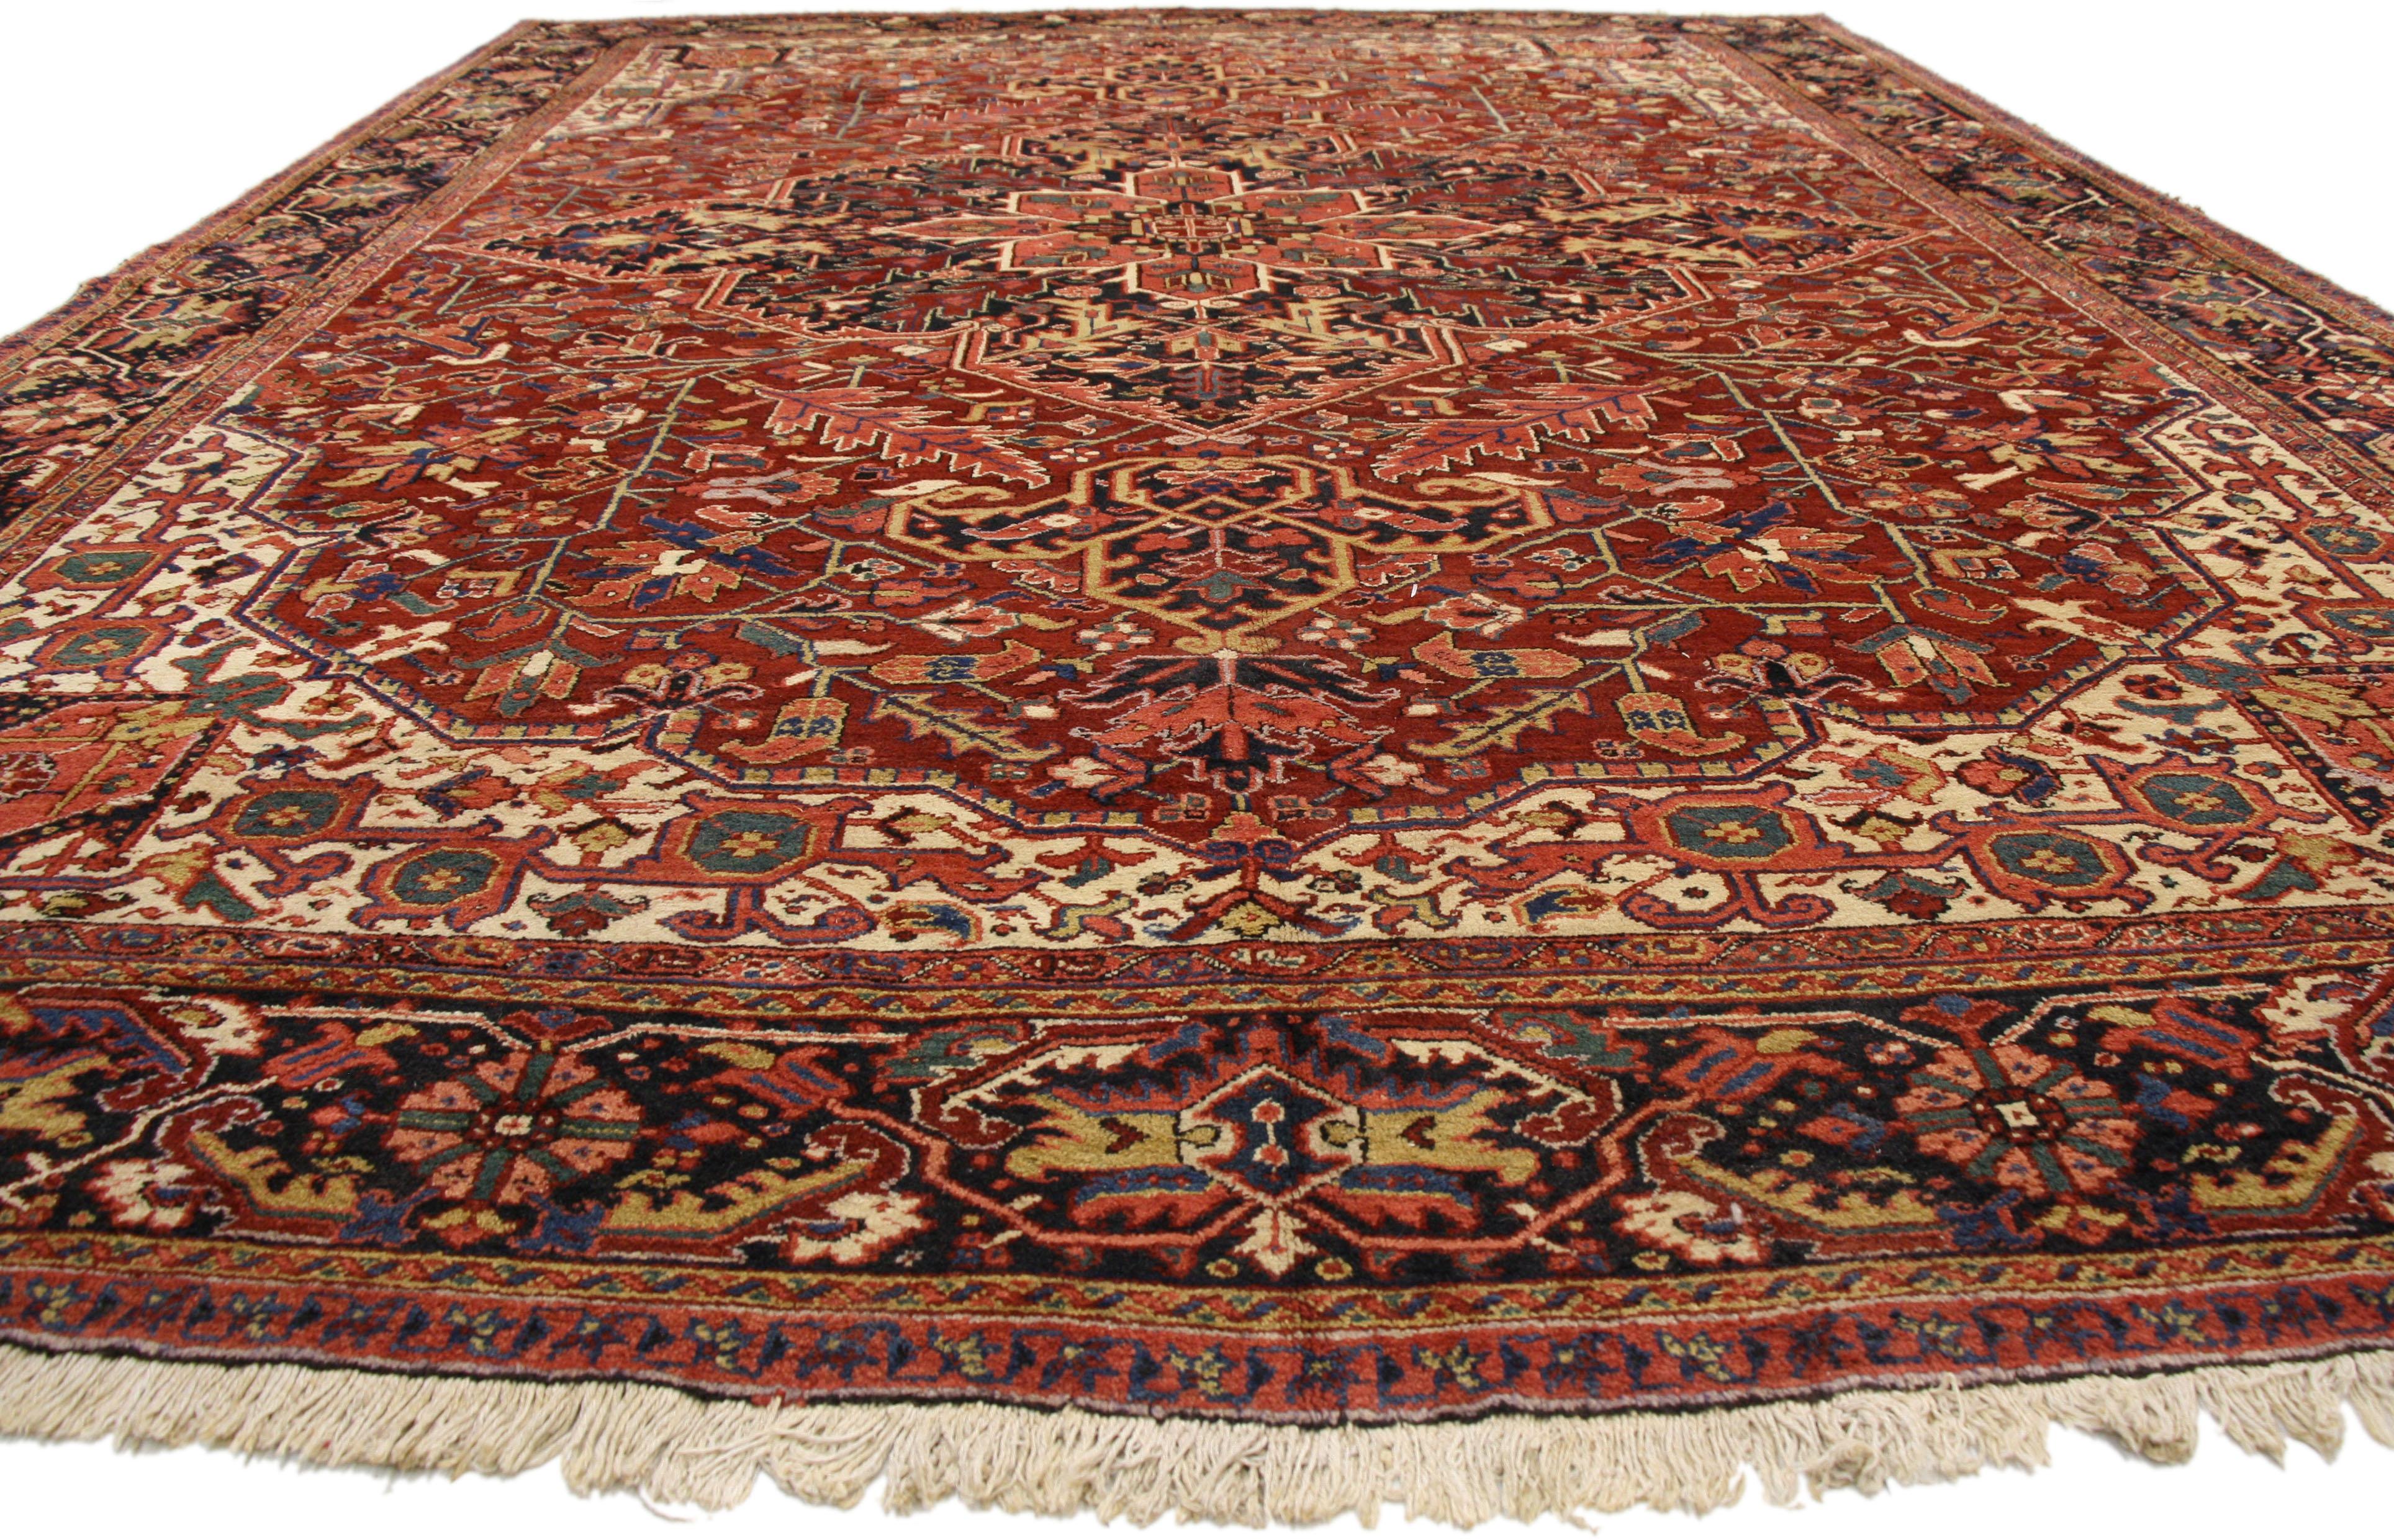 Hand-Knotted Antique Heriz Persian Palace Size Rug with English Tudor Manor Style